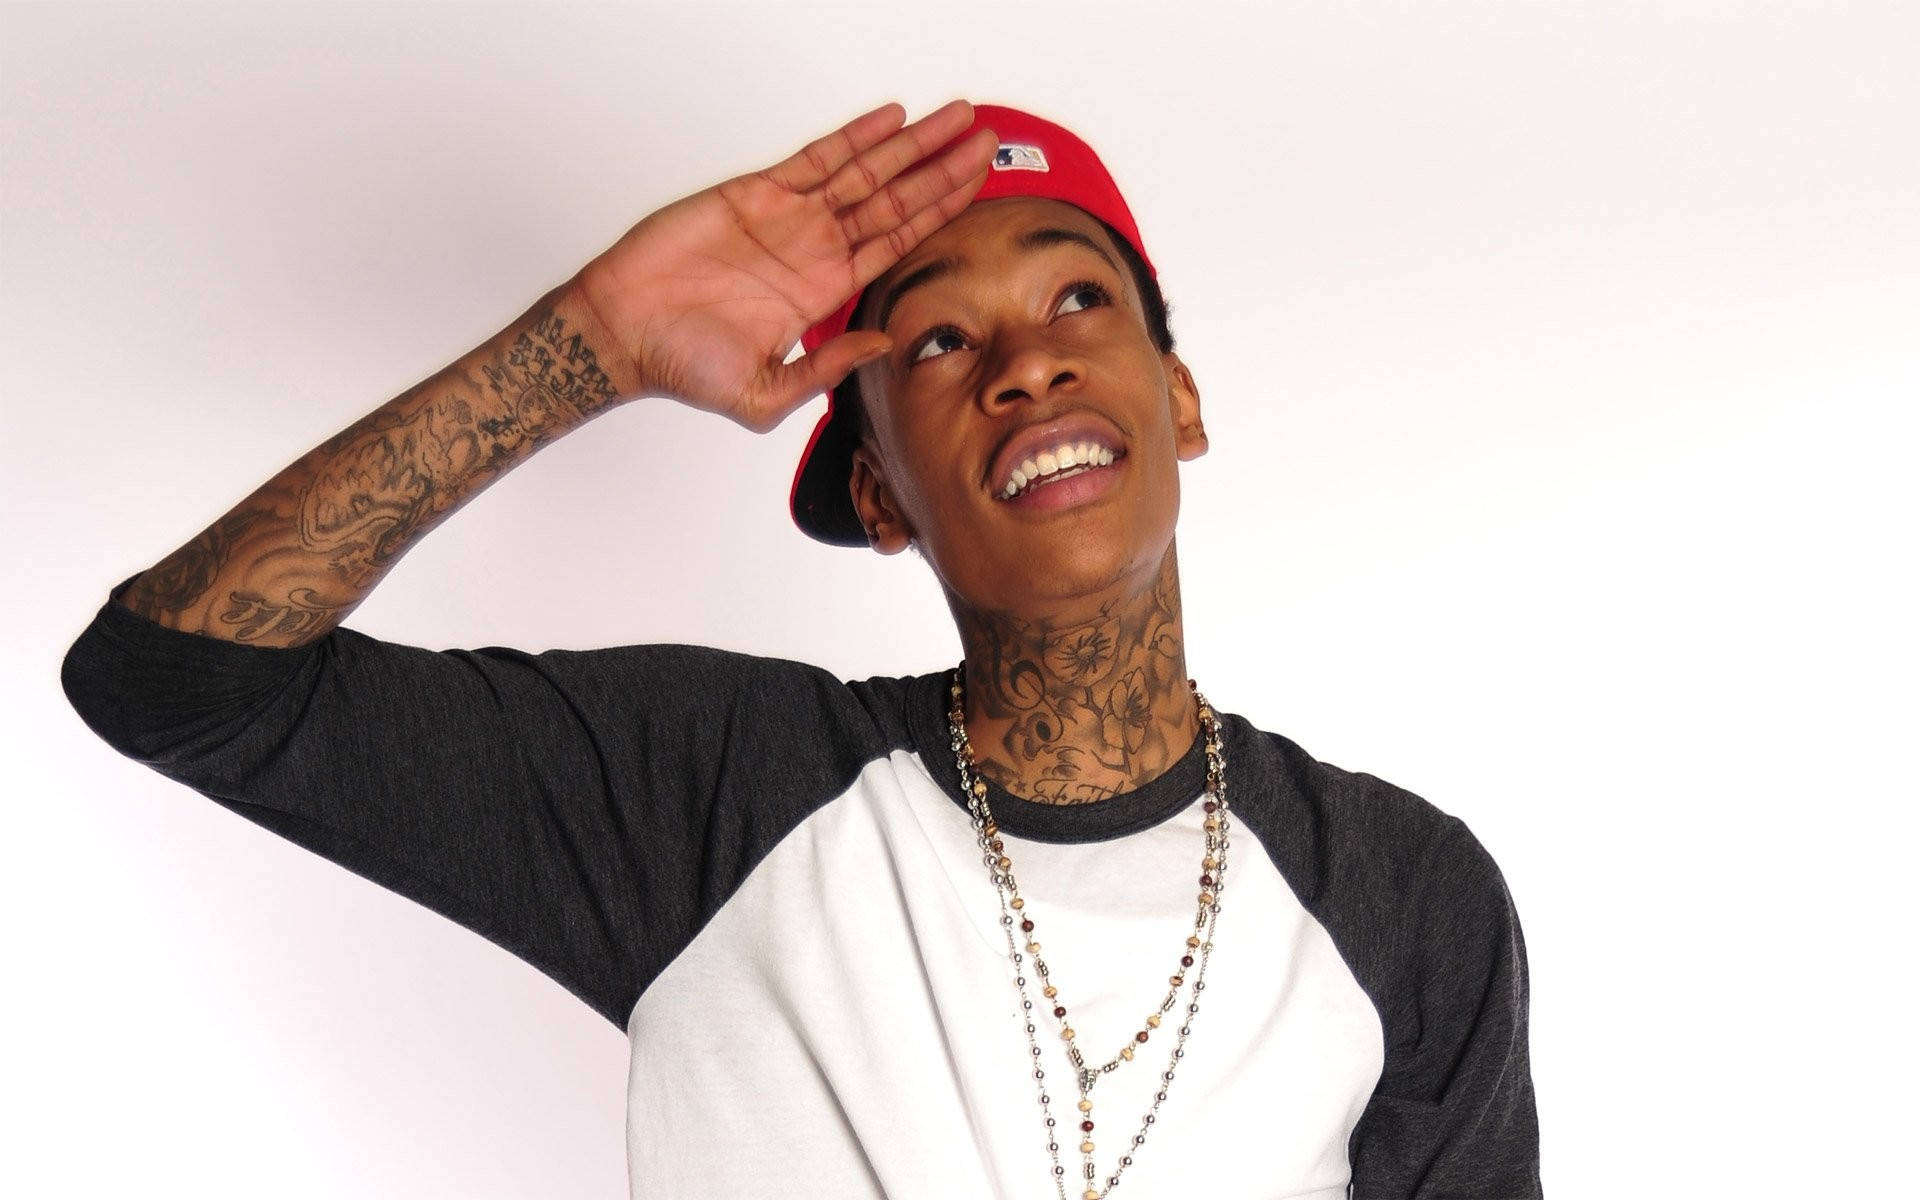 Wizkhalifa Salute Can Be Translated To Spanish As 